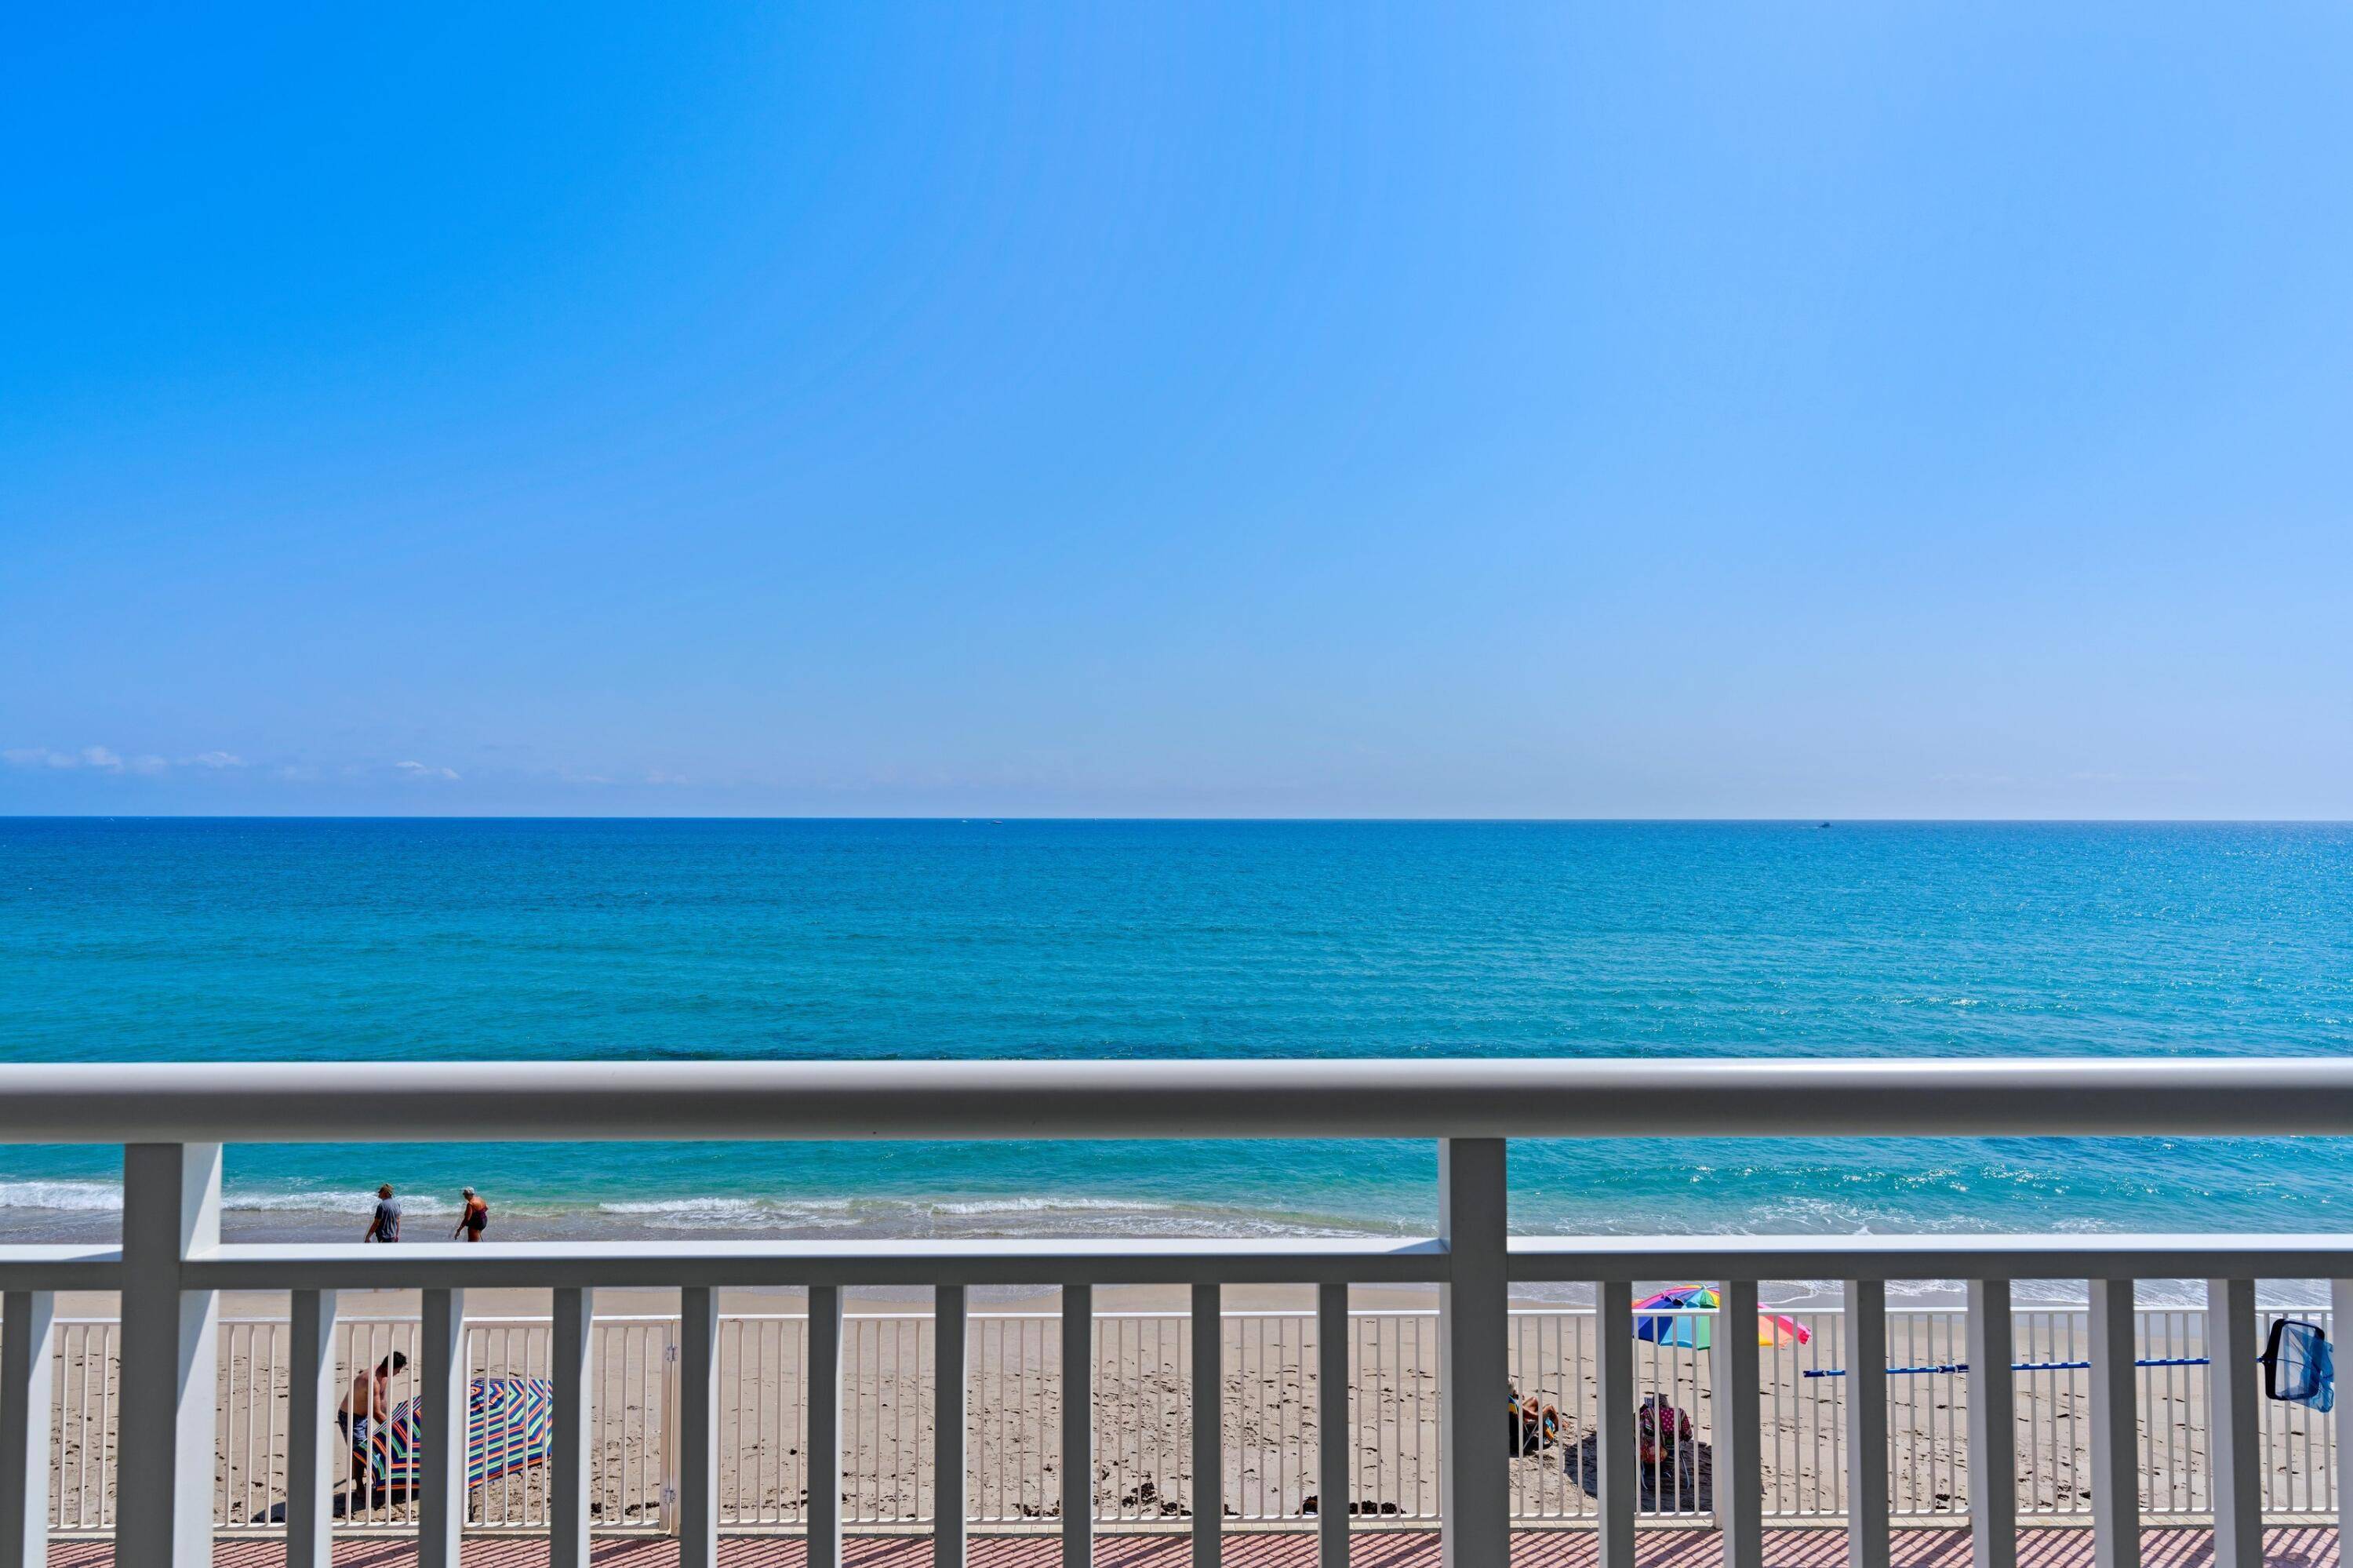 Ocean Ocean Ocean. You'll enjoy the direct oceanfront views from this spacious 2 BR Den or can be a 3rd Bedroom, 2.